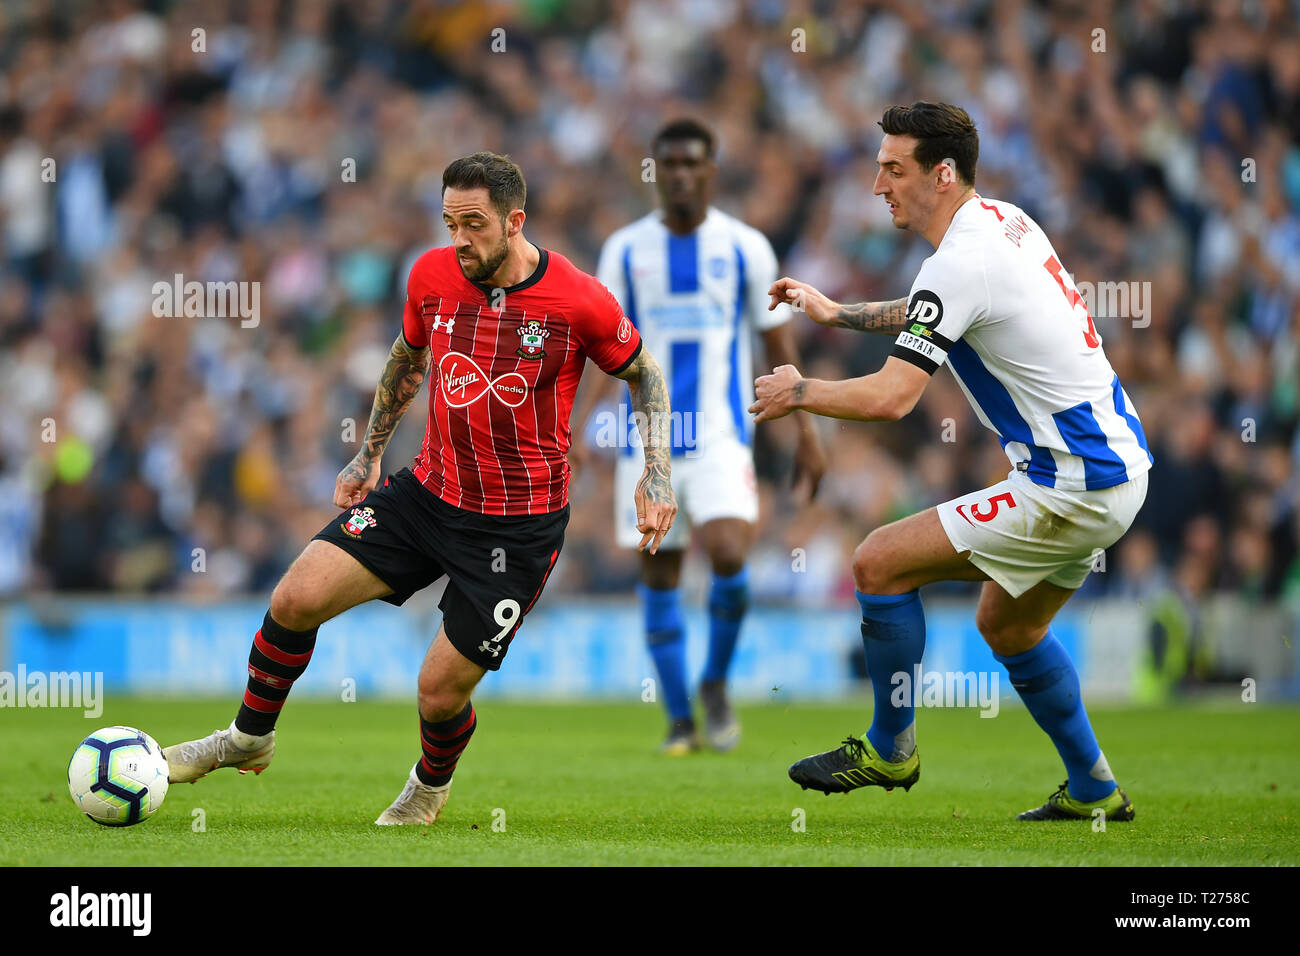 Brighton, UK. 30th March 2019.  Southampton forward Danny Ings gets away from Brighton defender Lewis Dunk during the Premier League match between Brighton and Hove Albion and Southampton  Editorial use only, license required for commercial use. No use in betting, games or a single club/league/player publications. Photograph may only be used for newspaper and/or magazine editorial purposes. May not be used for publications involving 1 player, 1 club or 1 competition without Credit: MI News & Sport /Alamy Live News Stock Photo